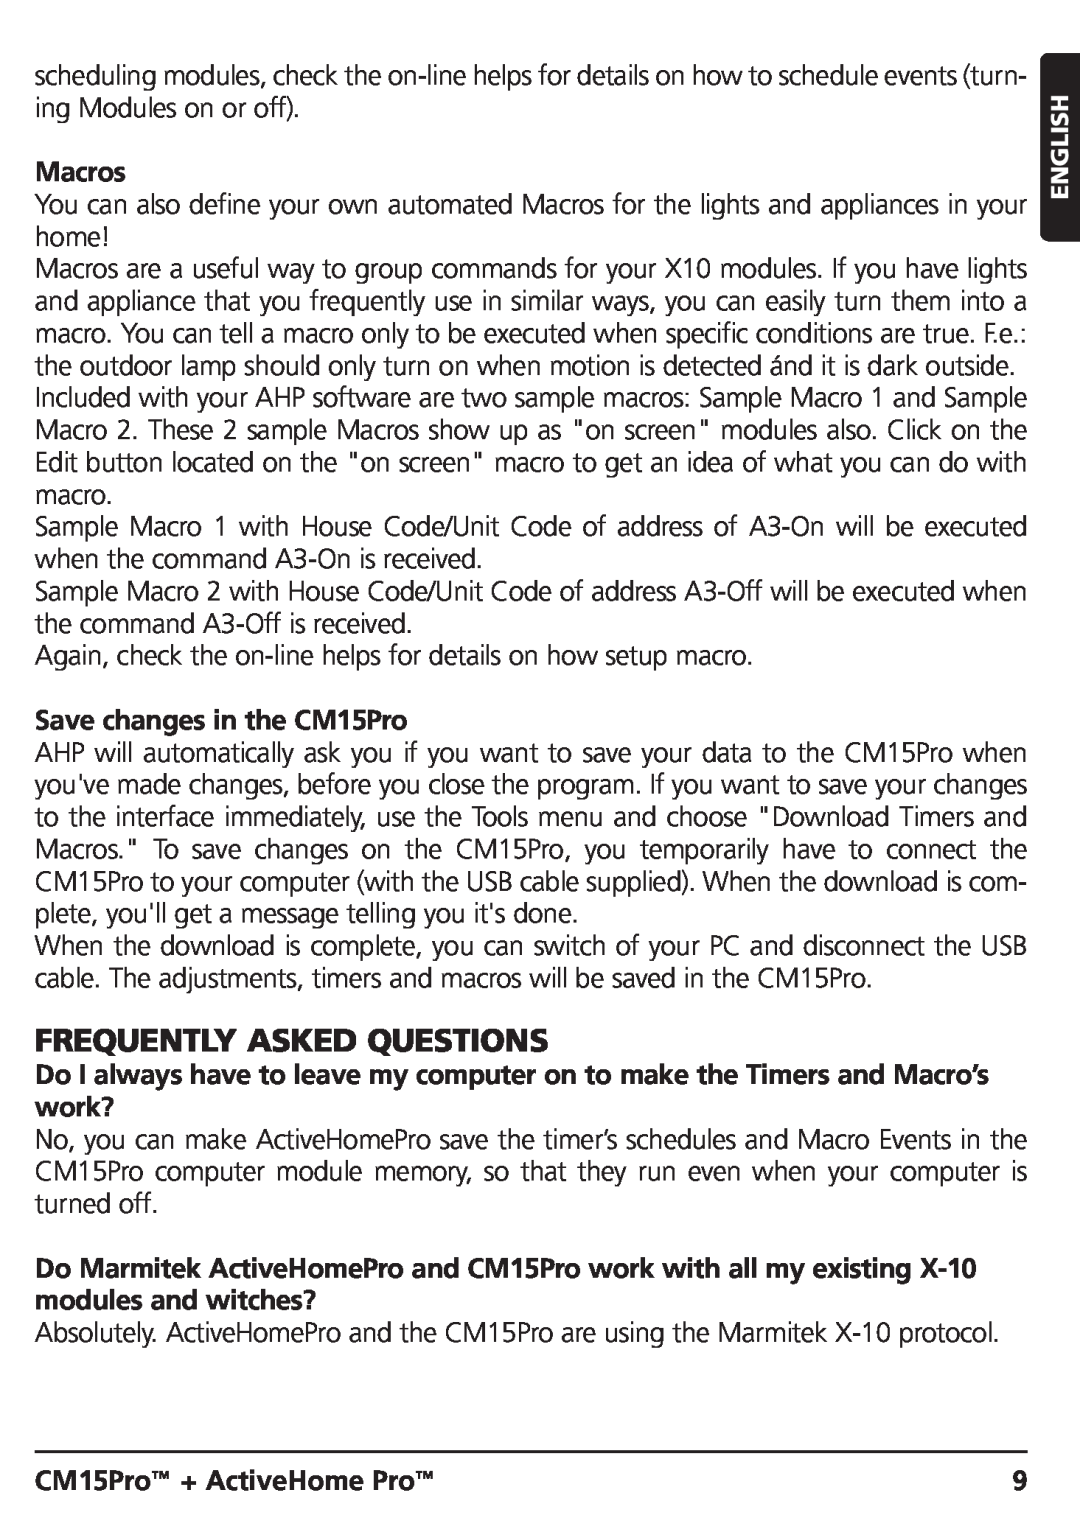 Marmitek CM15PRO manual Frequently Asked Questions, Macros, Save changes in the CM15Pro, CM15Pro + ActiveHome Pro 